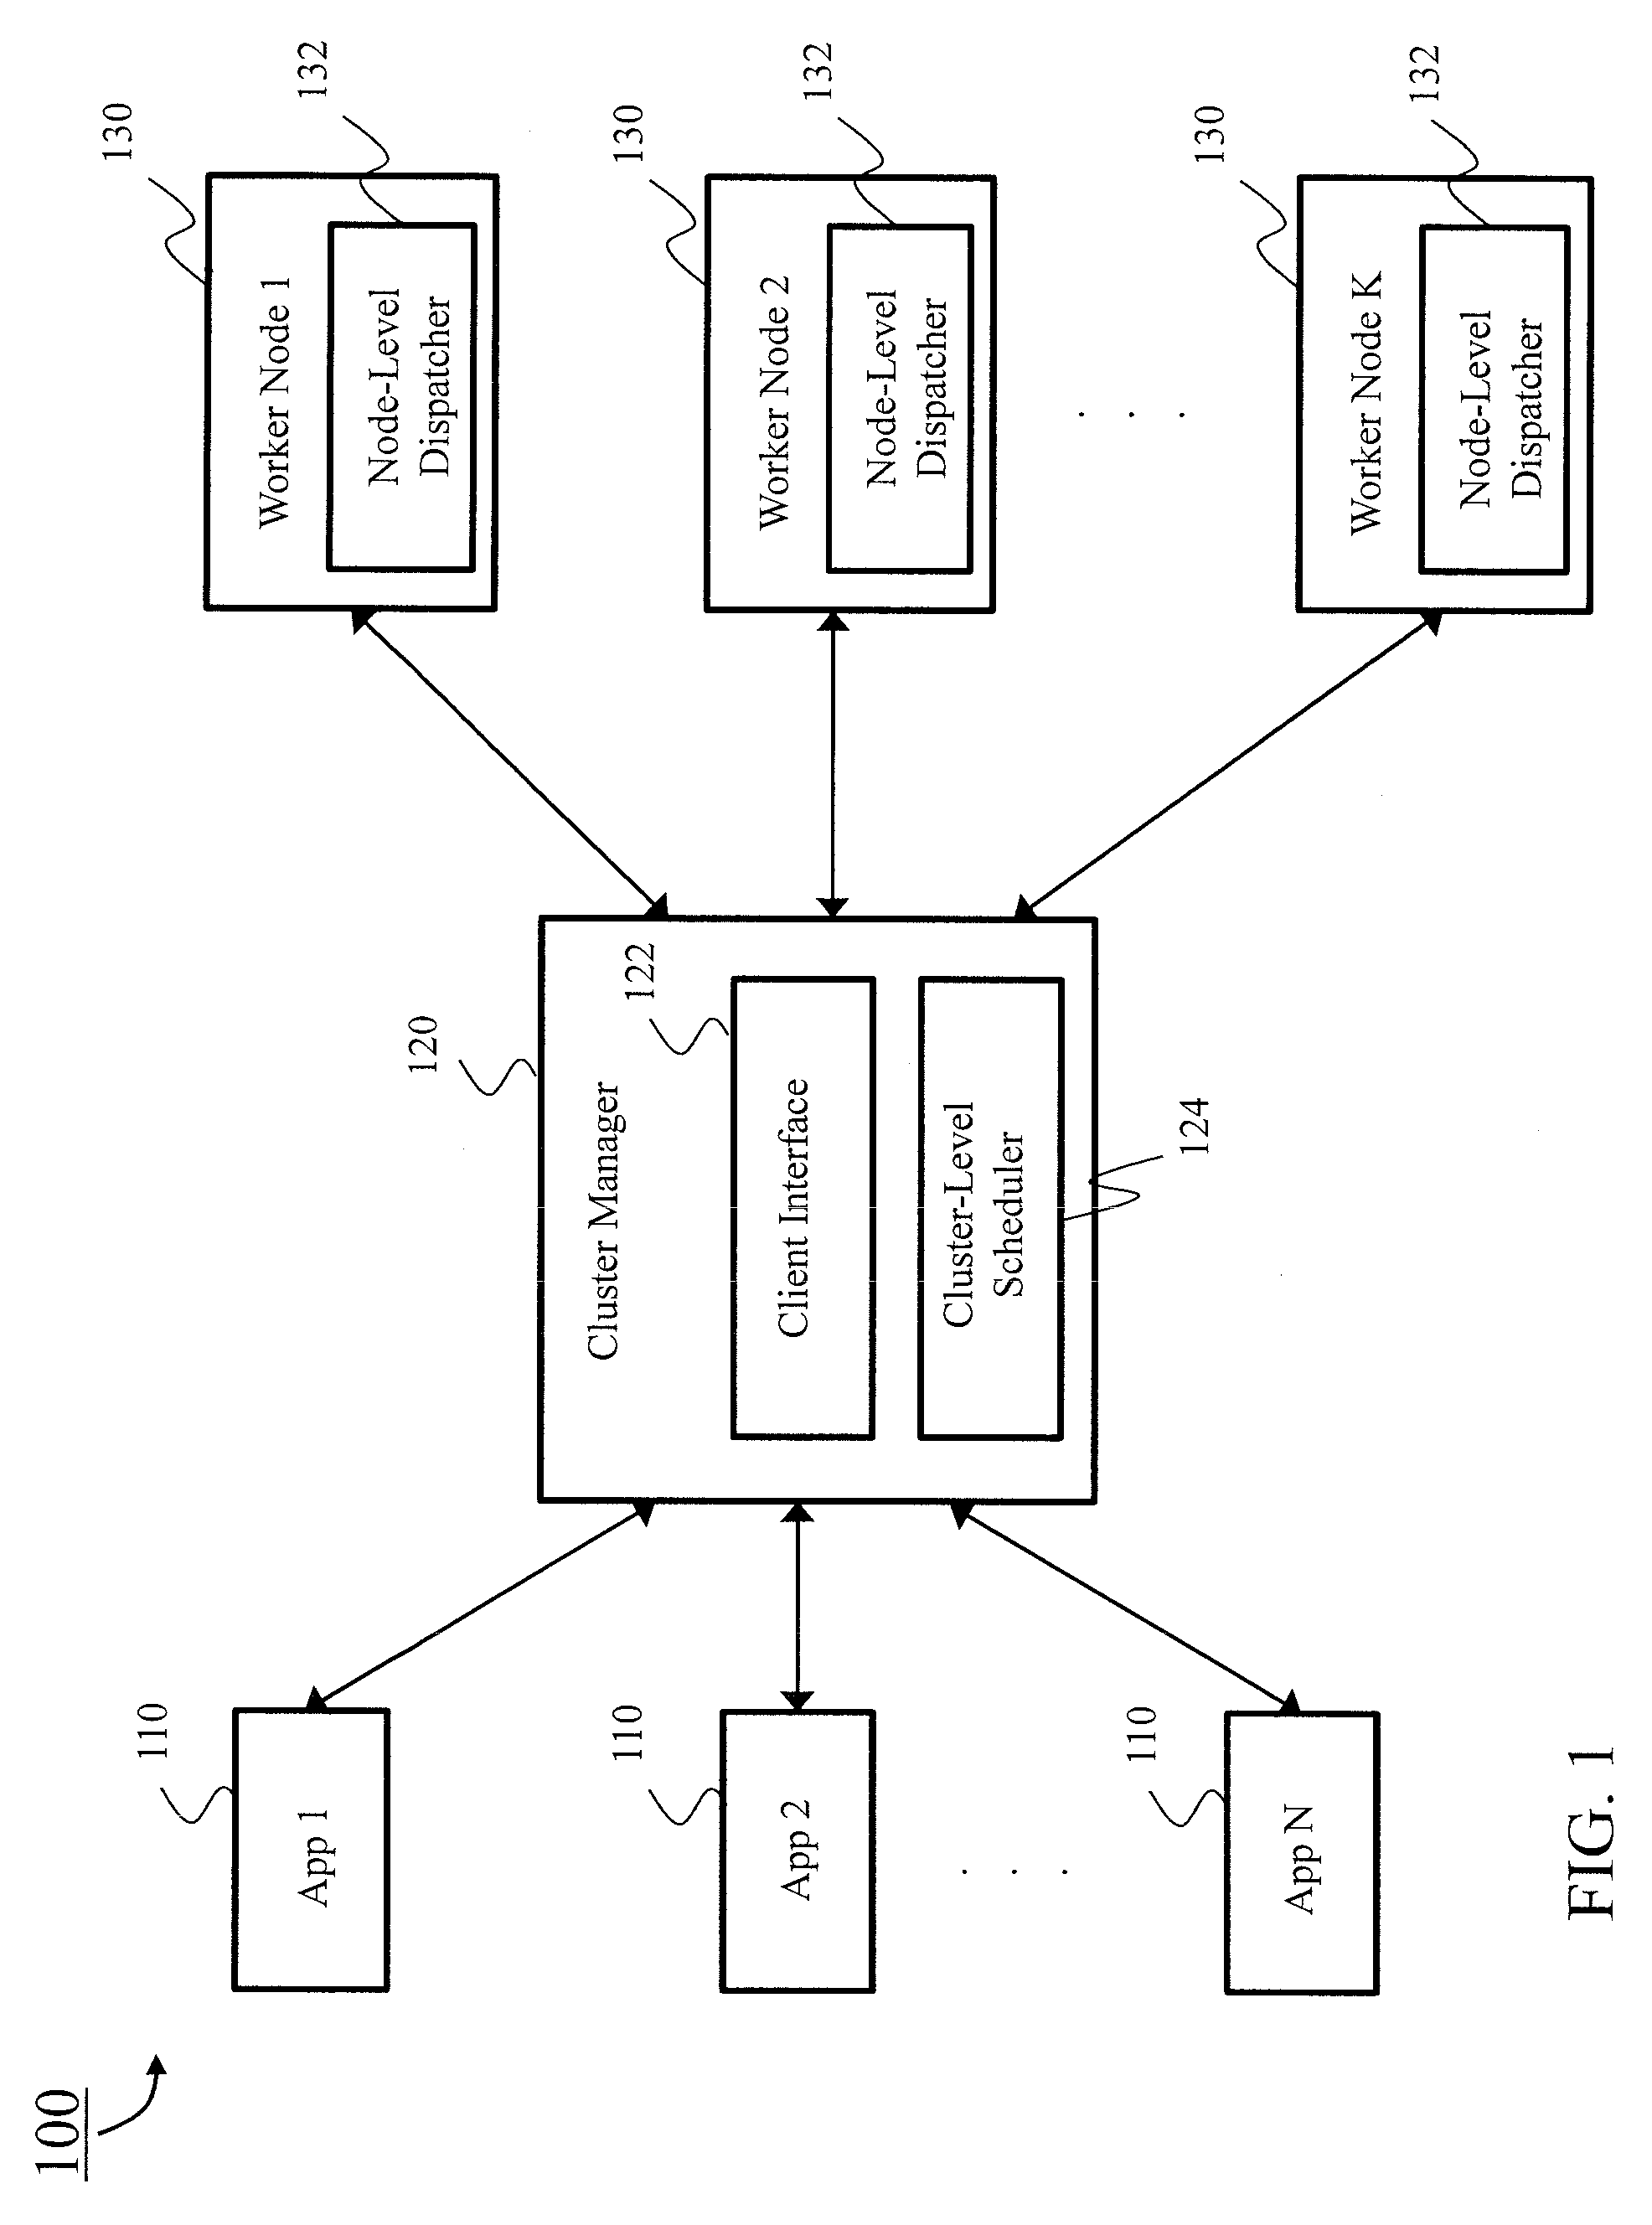 Scheduler and resource manager for coprocessor-based heterogeneous clusters